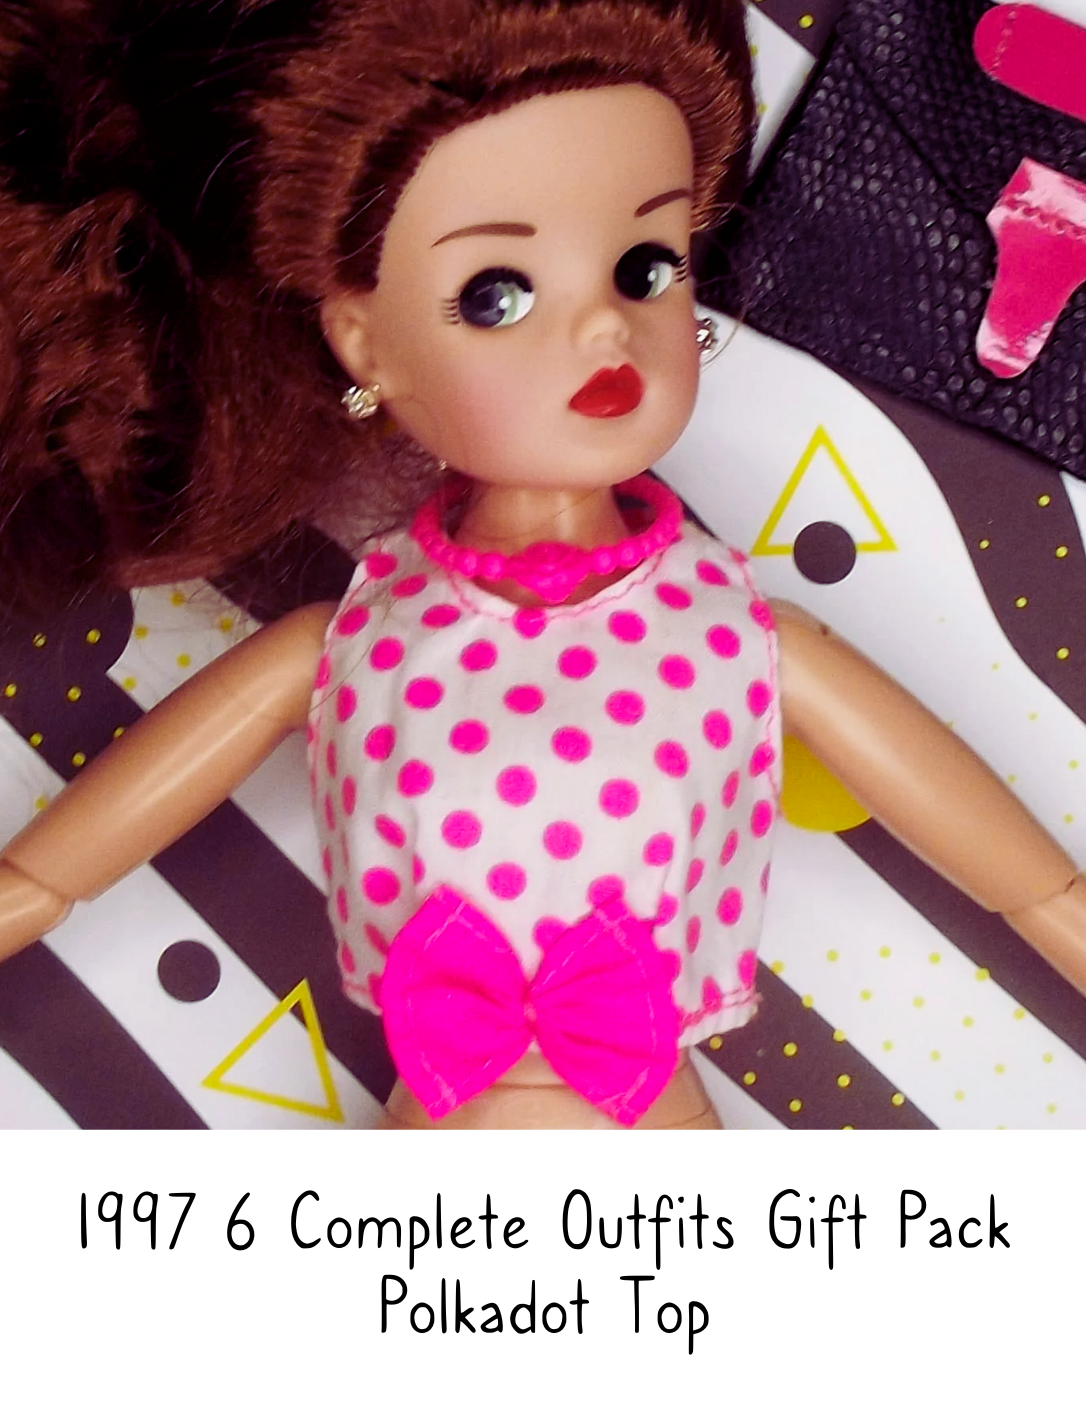 1997 6 Complete Outfits Barbie Fashion Pack Pink and White Polkadot Top